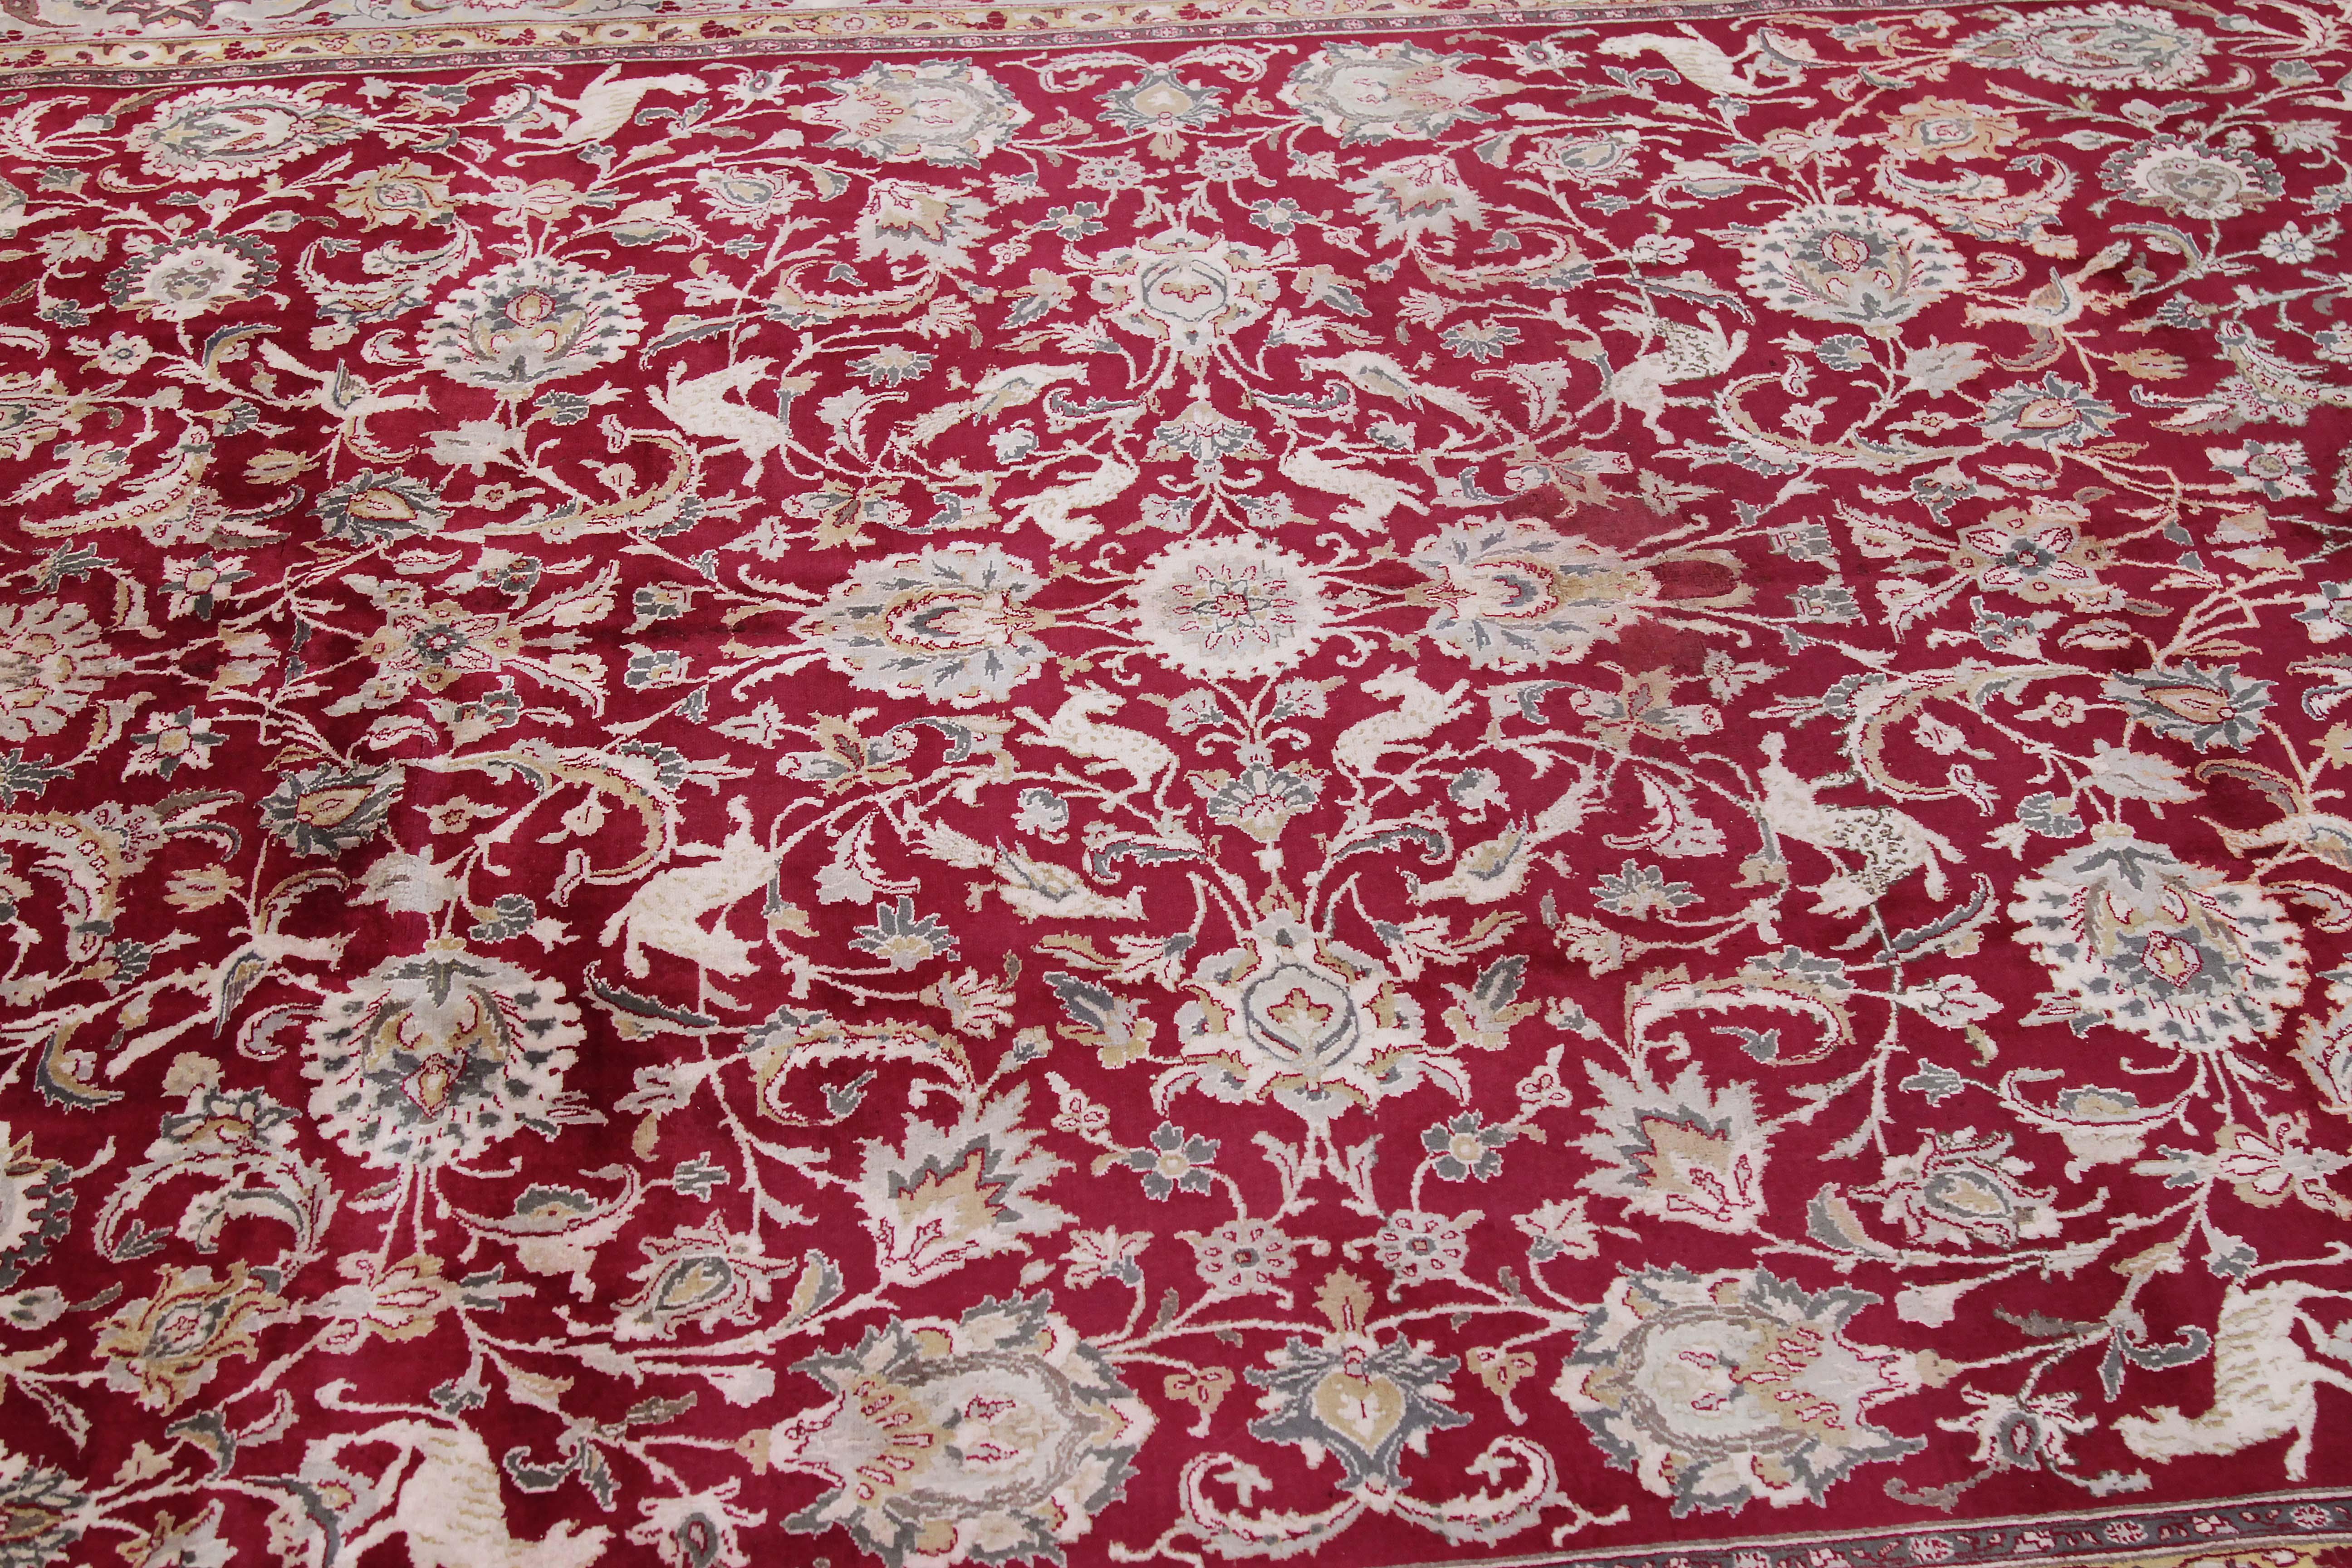 Hand-Woven Antique Persian Tabriz Rug with Floral Details on Red Field For Sale